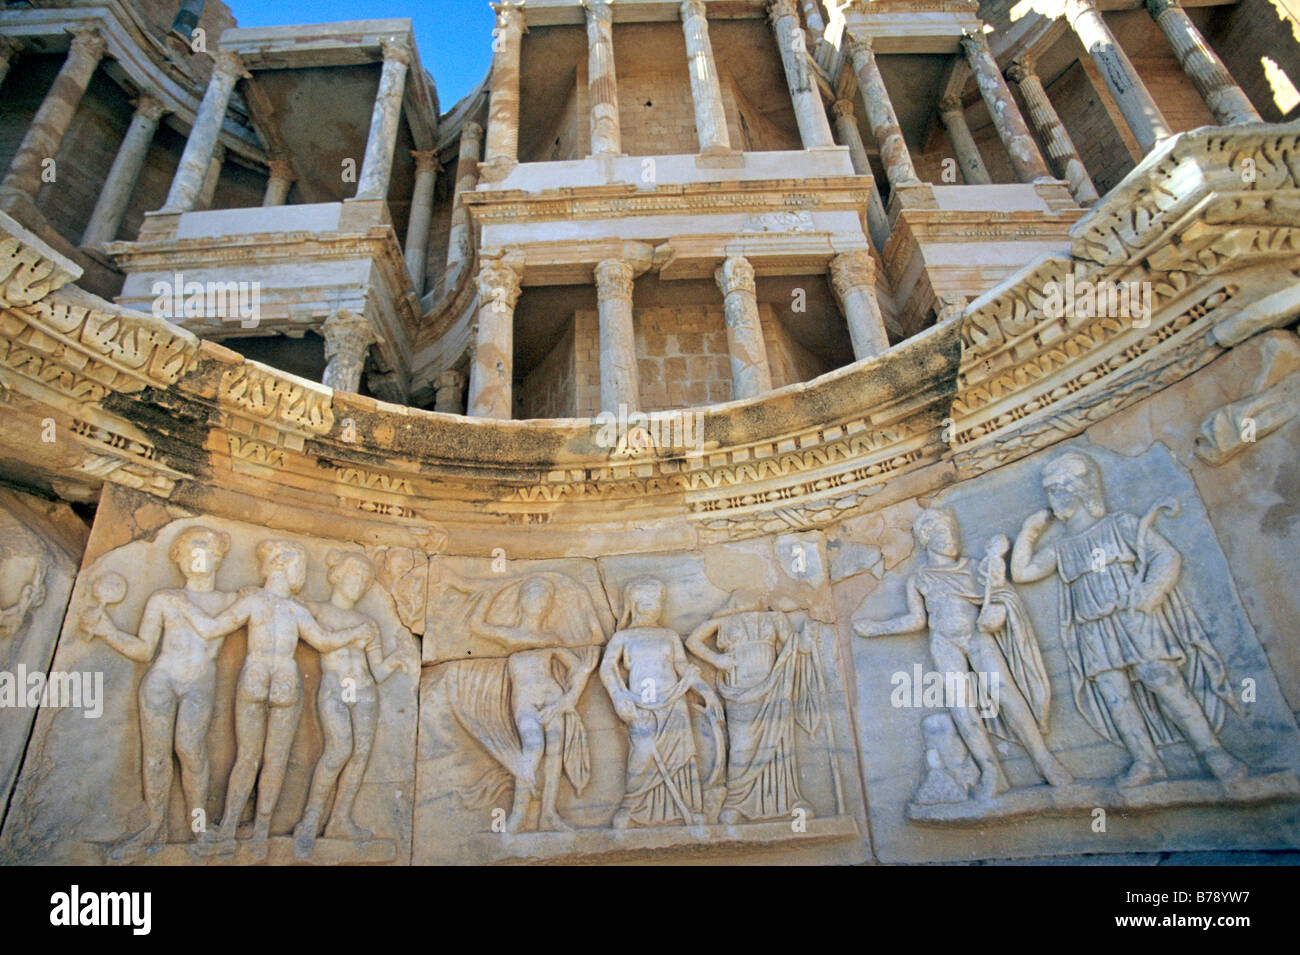 Bas-relief of several carved Roman figures at ruins of Sabratha Stock Photo